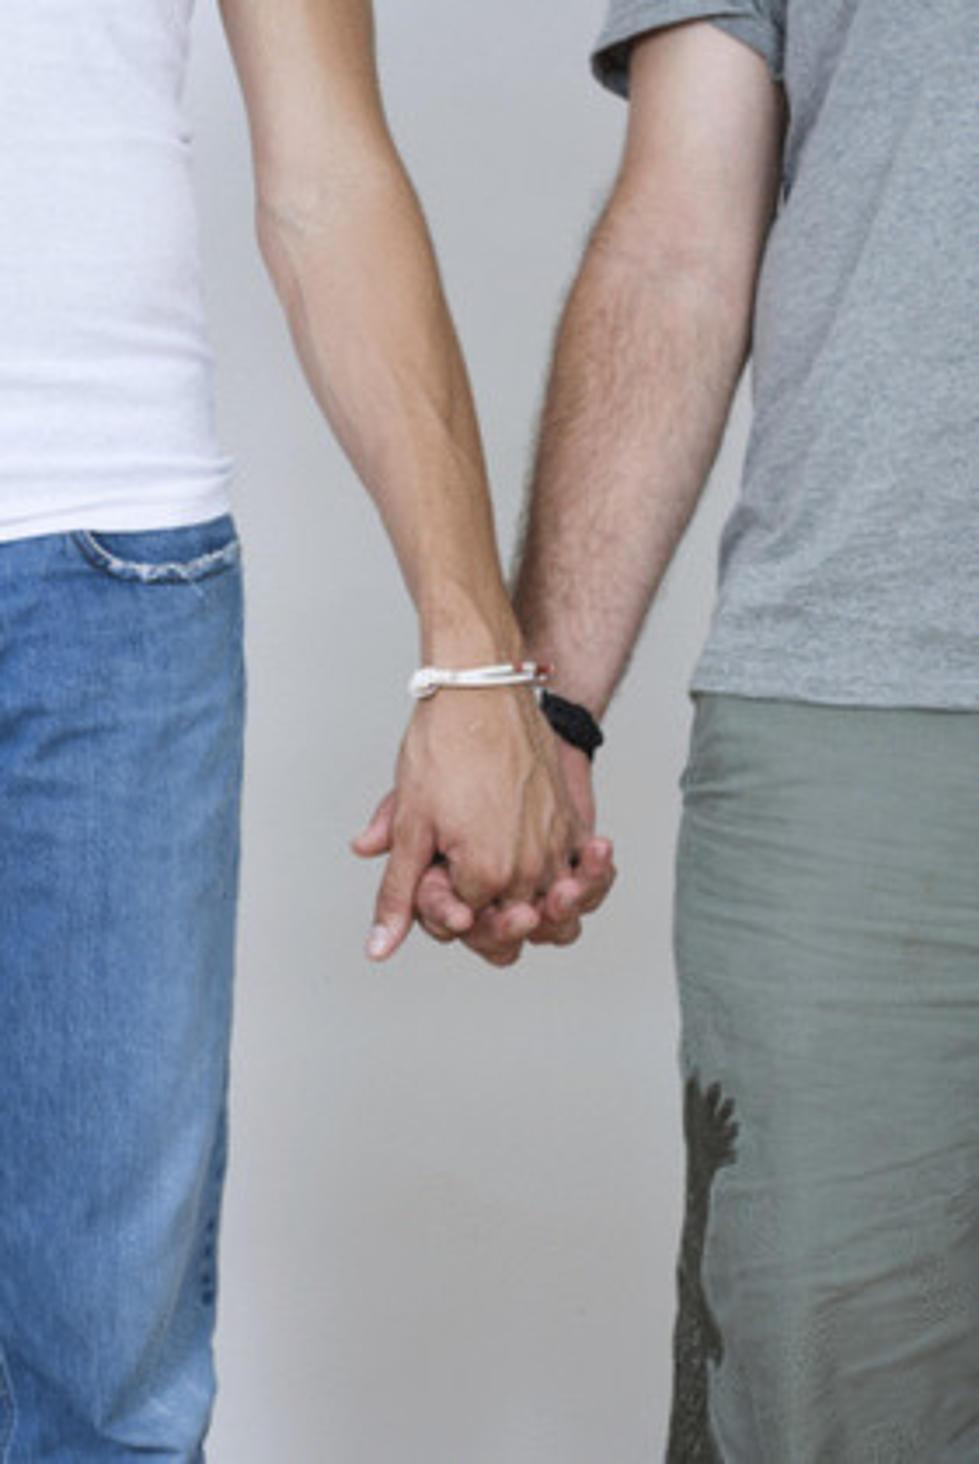 Idaho Ministers Told to Perform Gay Marriages or Face Jail